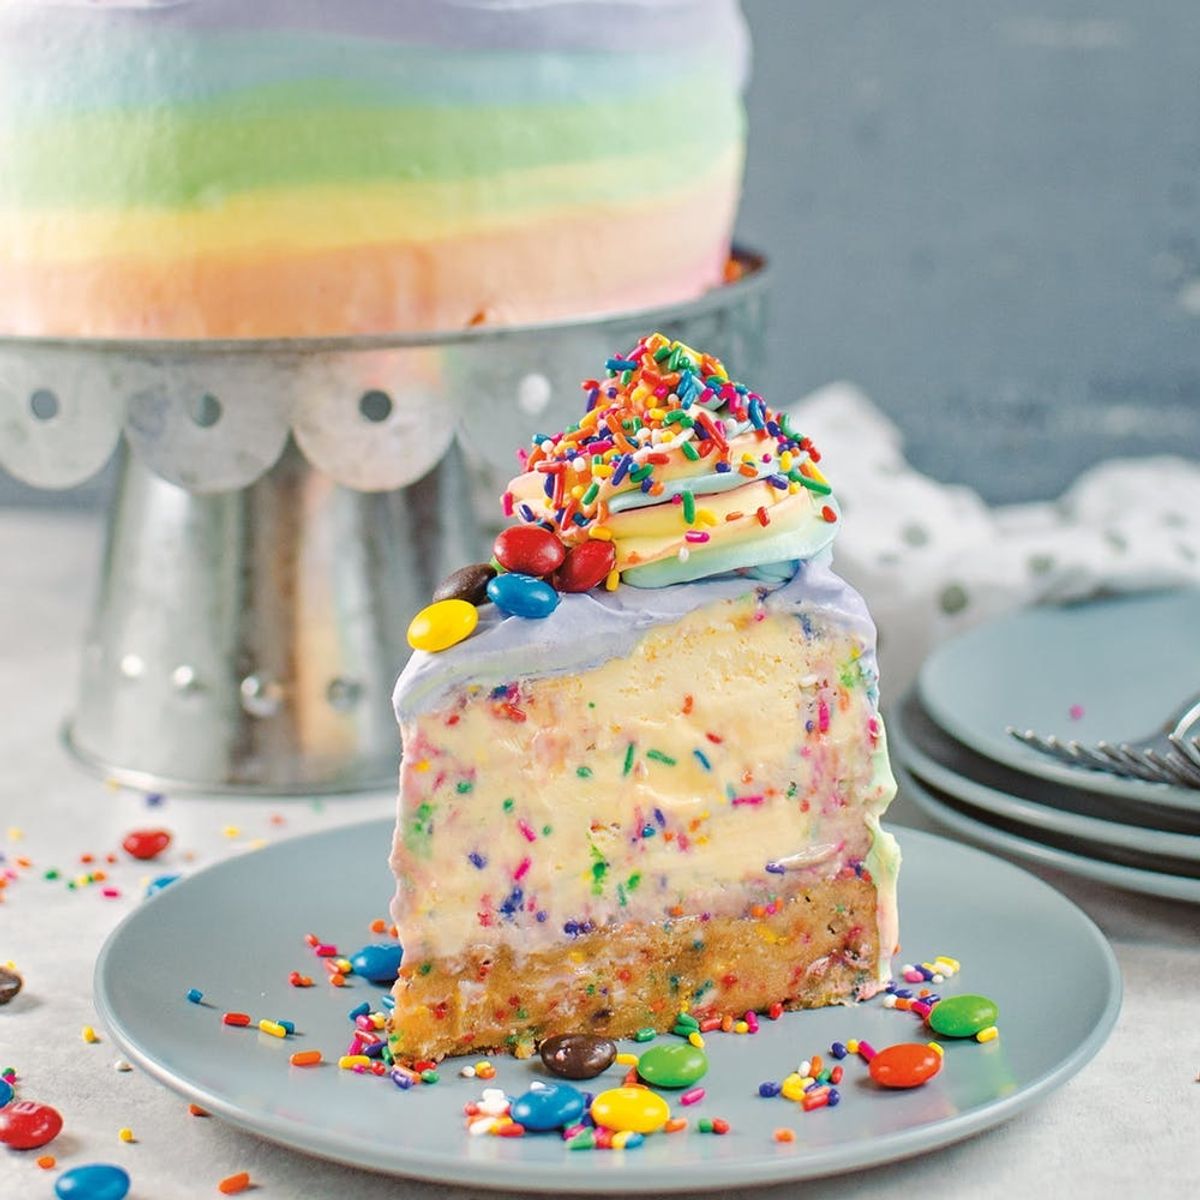 You’ll Want to Dive Headfirst into This Rainbow Funfetti Ice Cream Cake